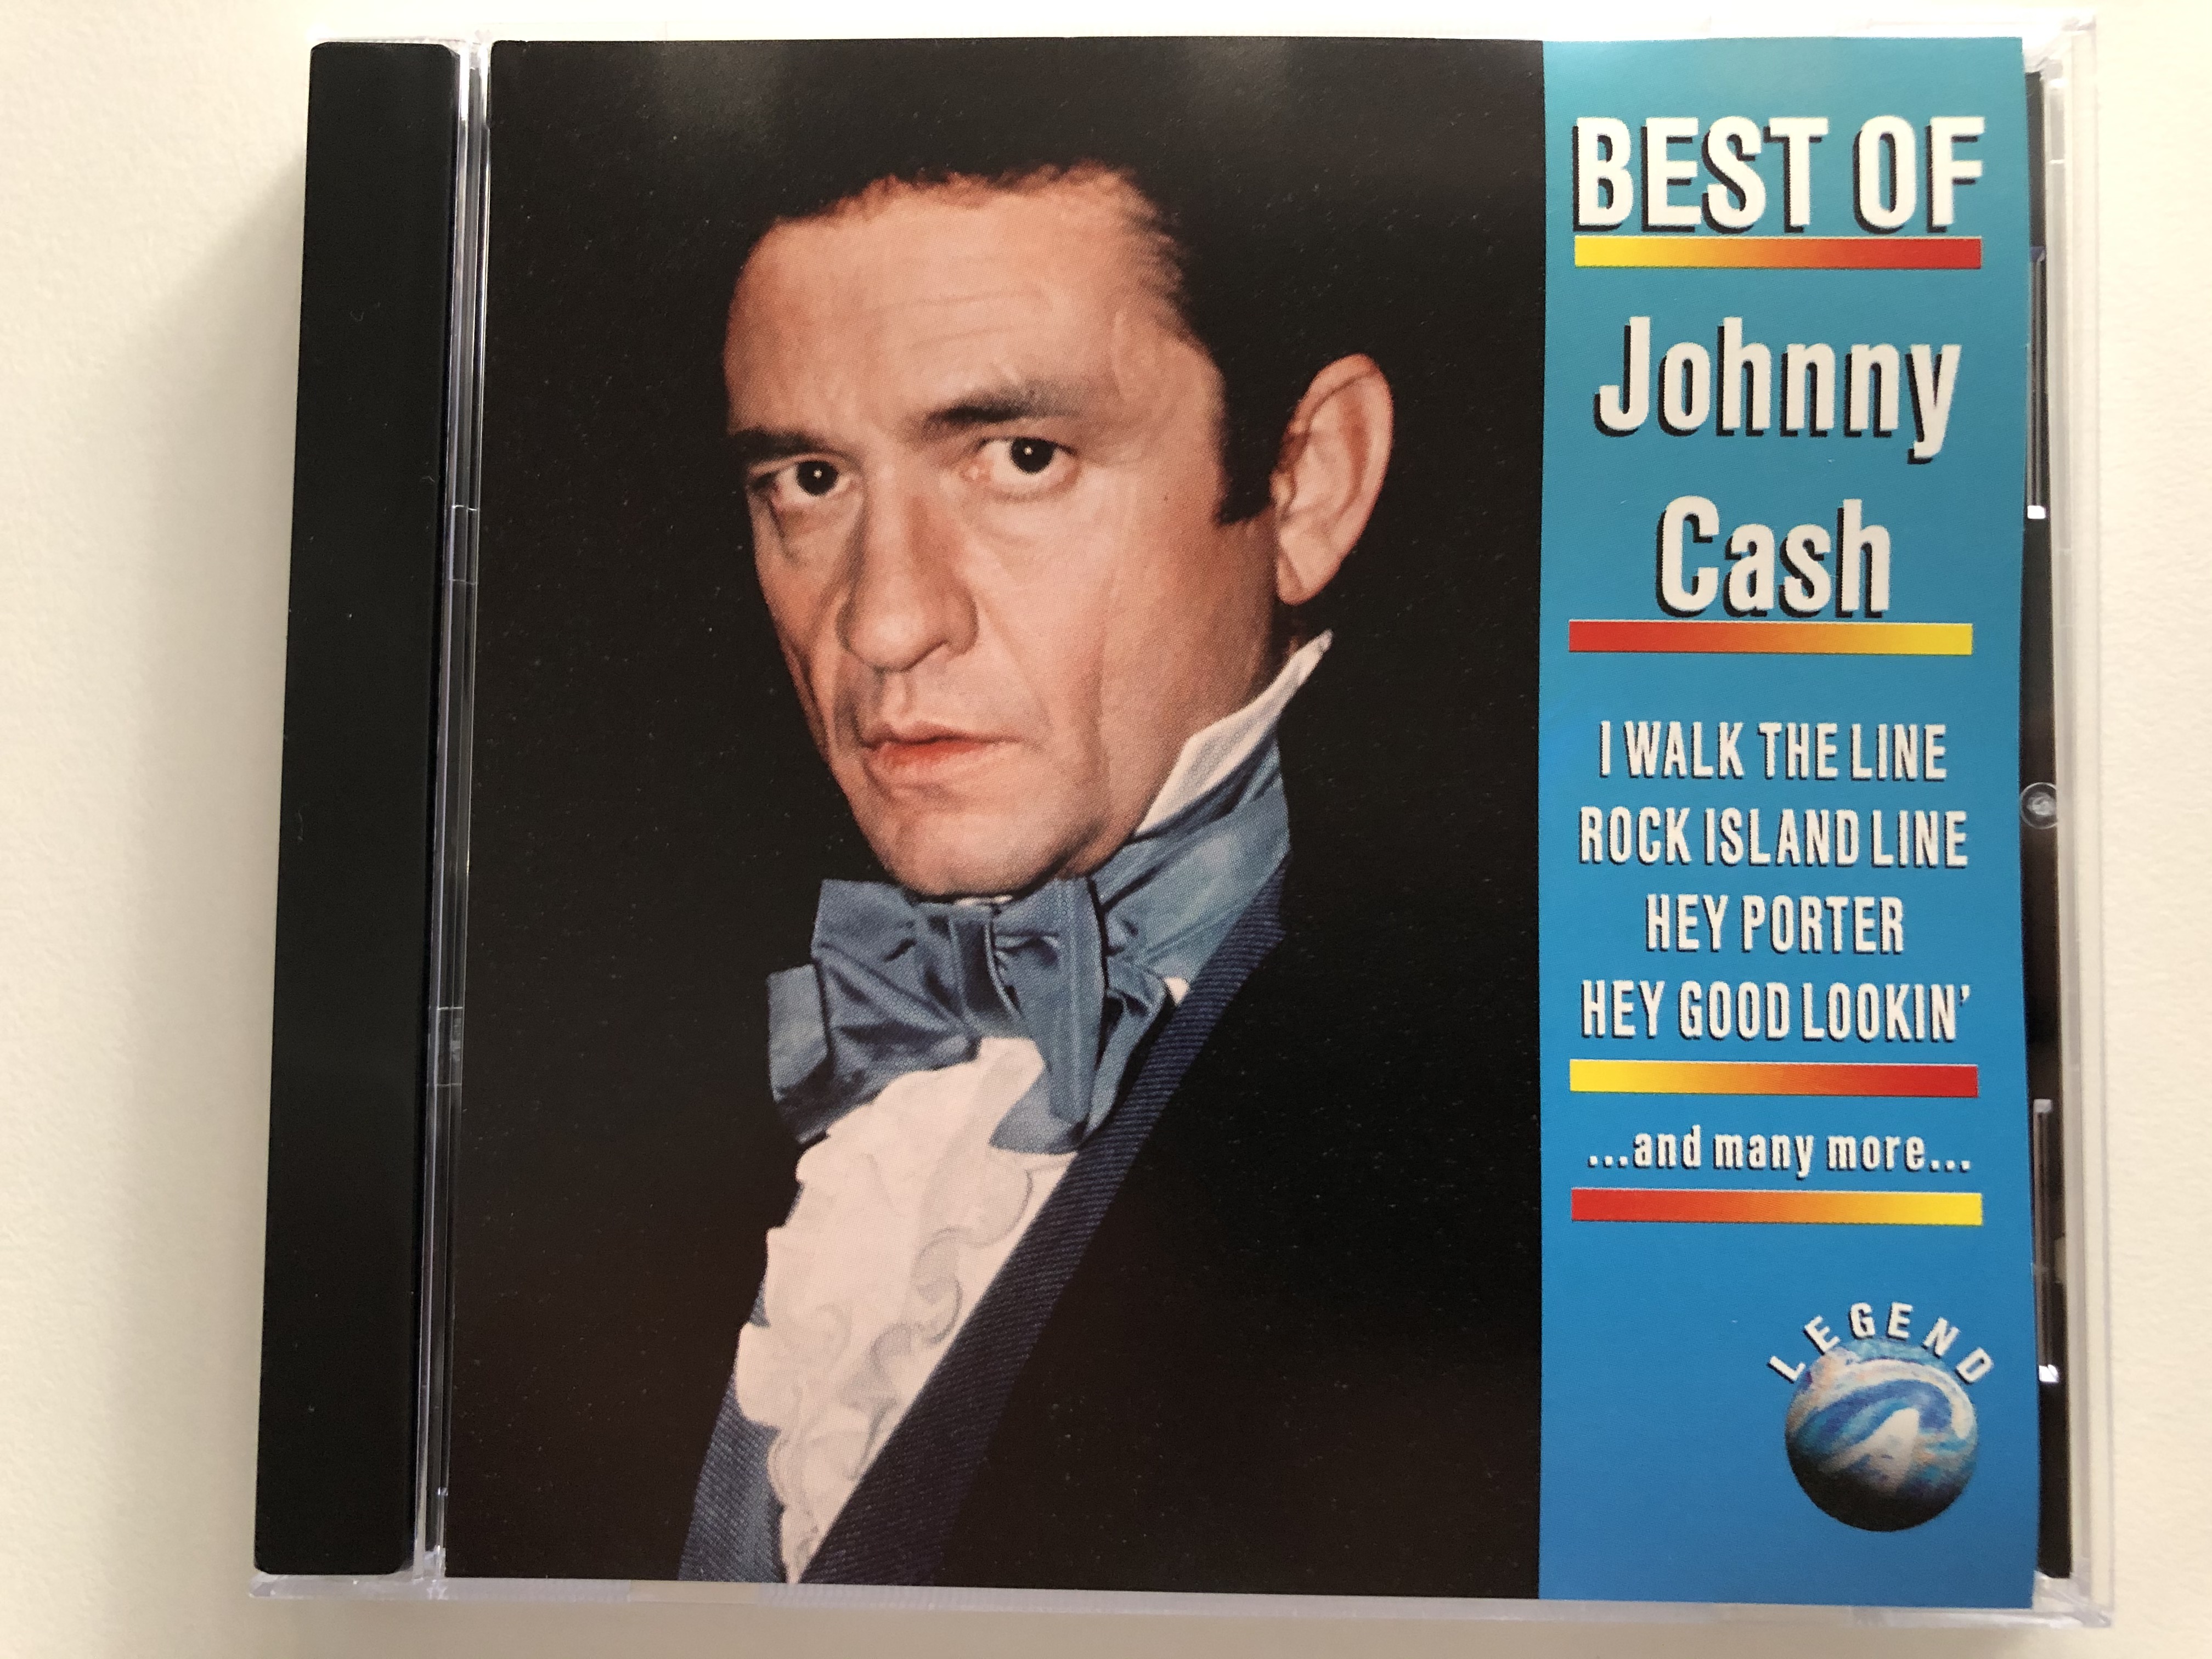 the-best-of-johnny-cash-i-walk-the-line-rock-island-line-hey-porter-hey-good-lookin-and-many-more...-wz-tontr-ger-vertriebs-gmbh-audio-cd-1993-wz-90072-1-.jpg